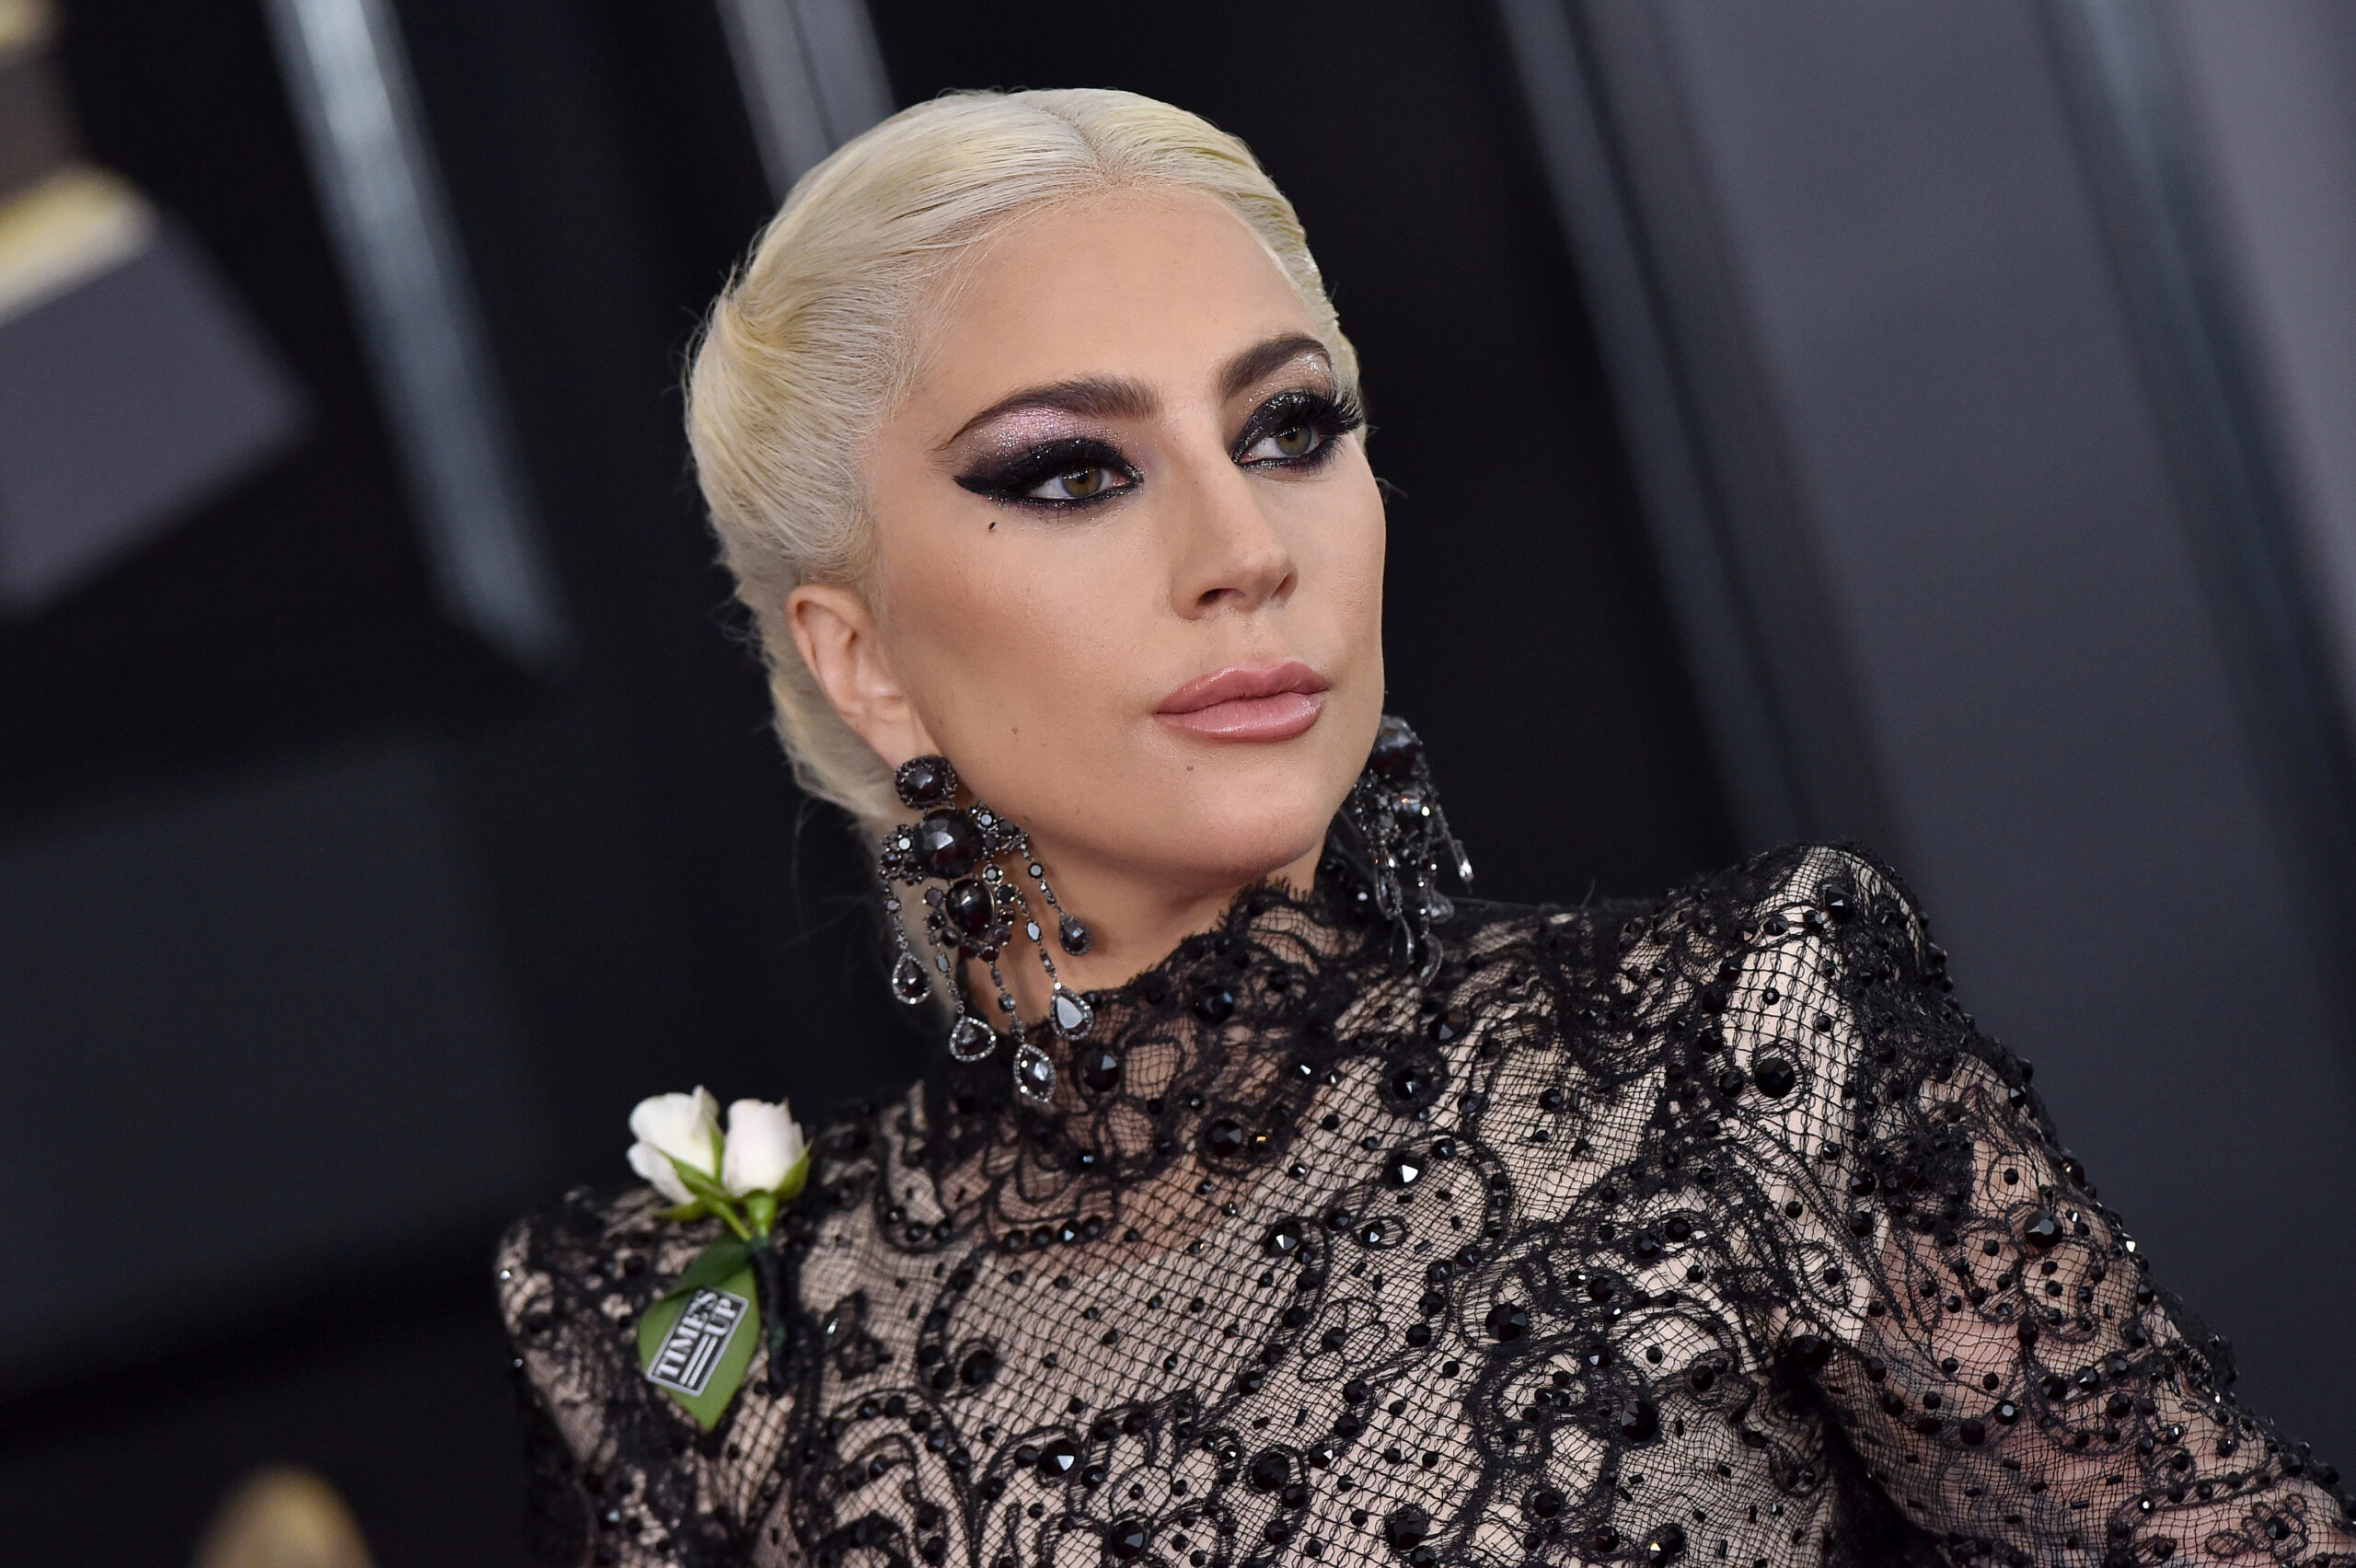 What is Lady Gaga's net worth?